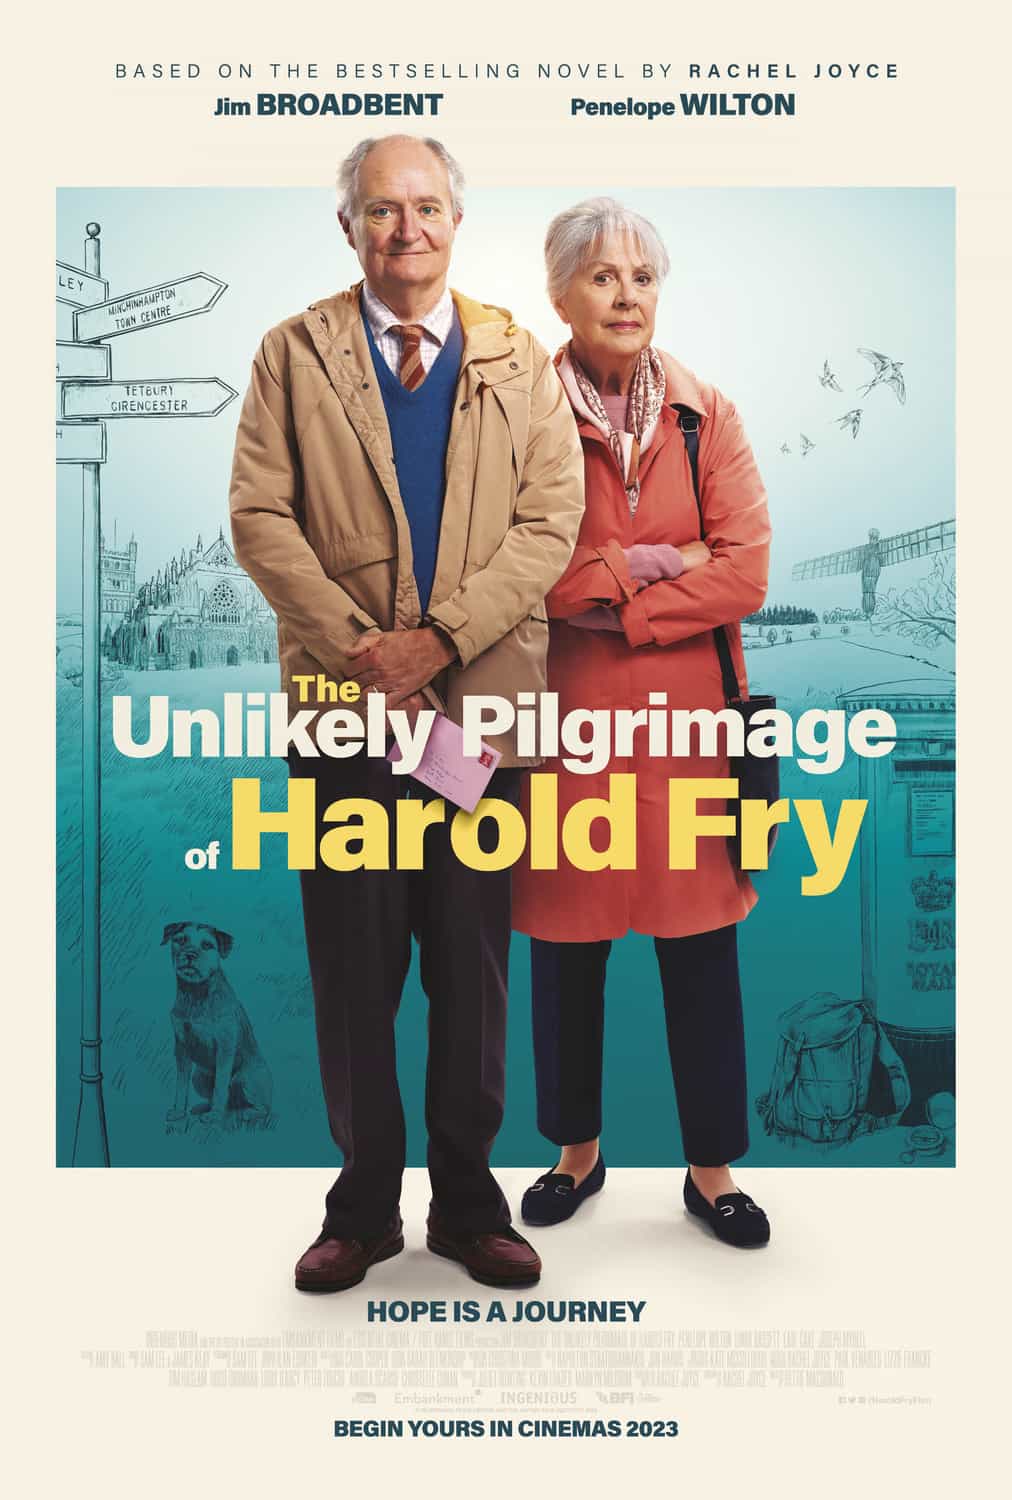 The Unlikely Pilgrimage Of Harold Fry has been given a 12A age rating in the UK for infrequent strong language, drug misuse, suicide, moderate sex references